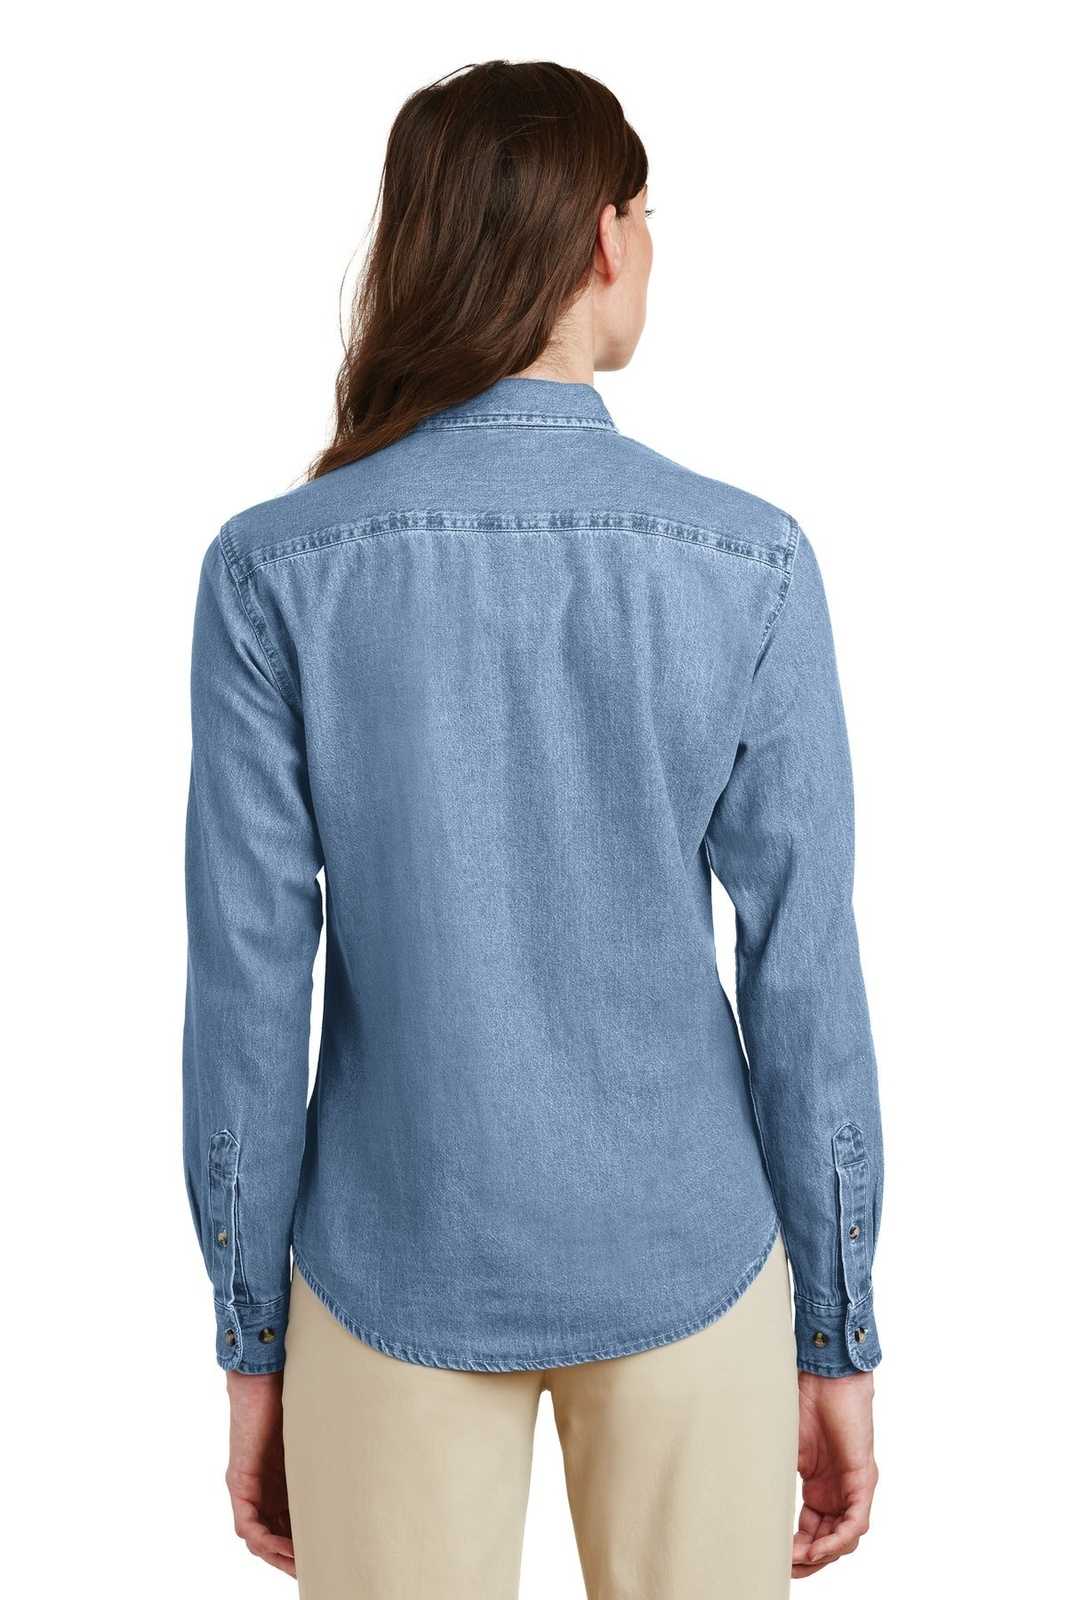 Port &amp; Company LSP10 Ladies Long Sleeve Value Denim Shirt - Faded Blue - HIT a Double - 2